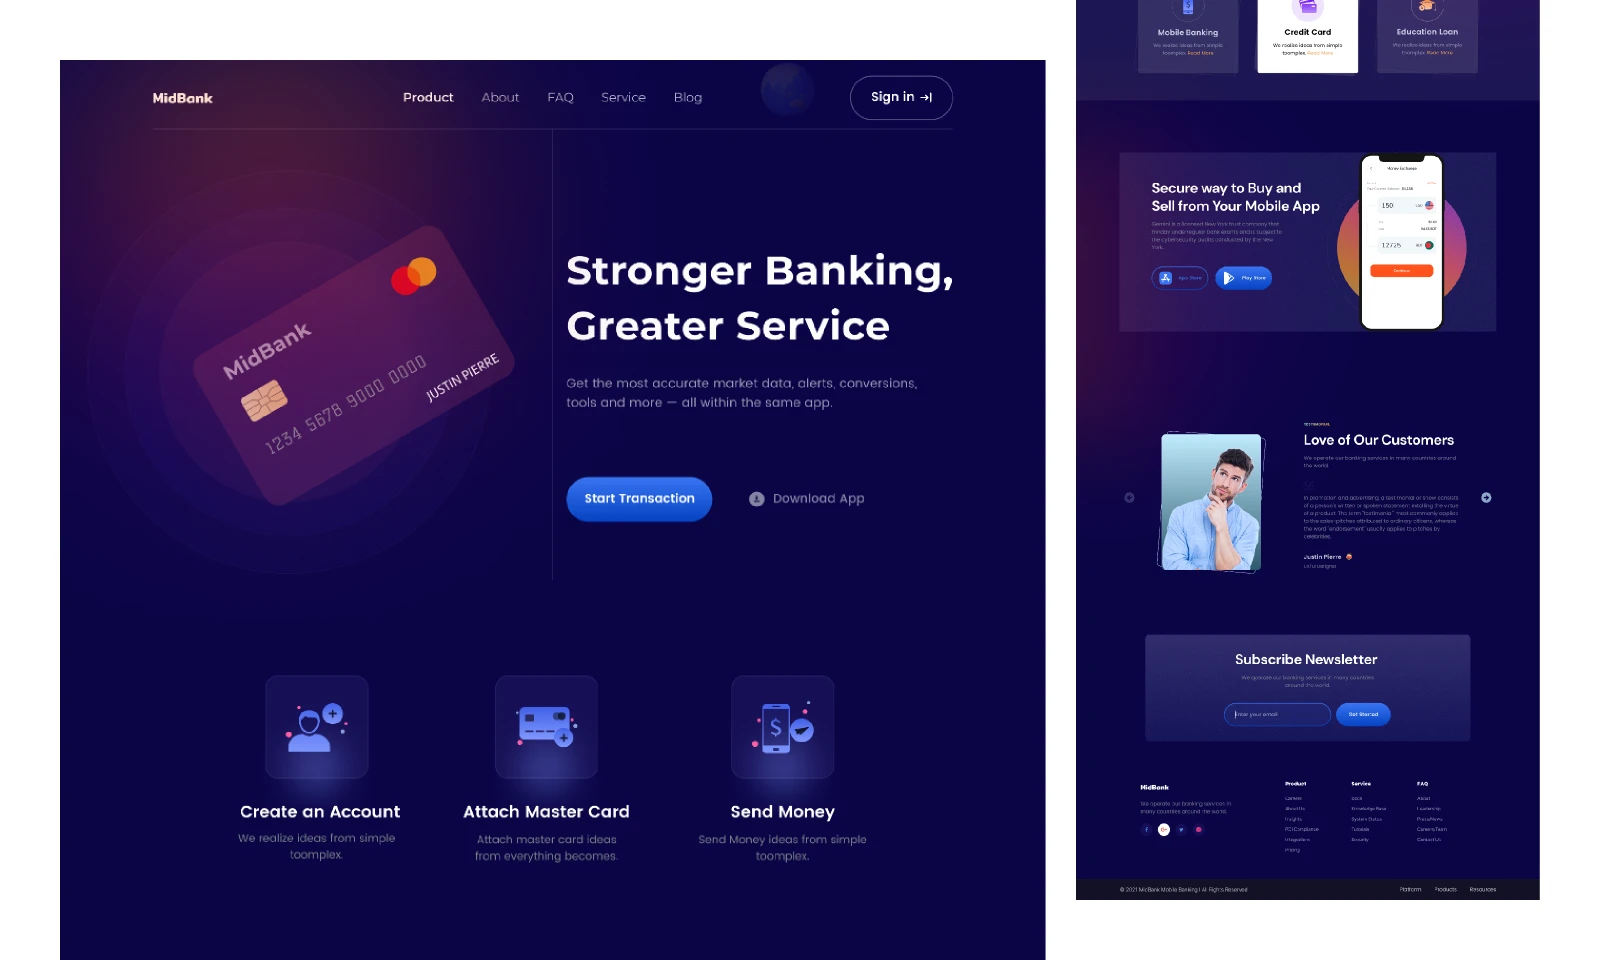 Mobile Banking Website Landing Page Design for Figma and Adobe XD